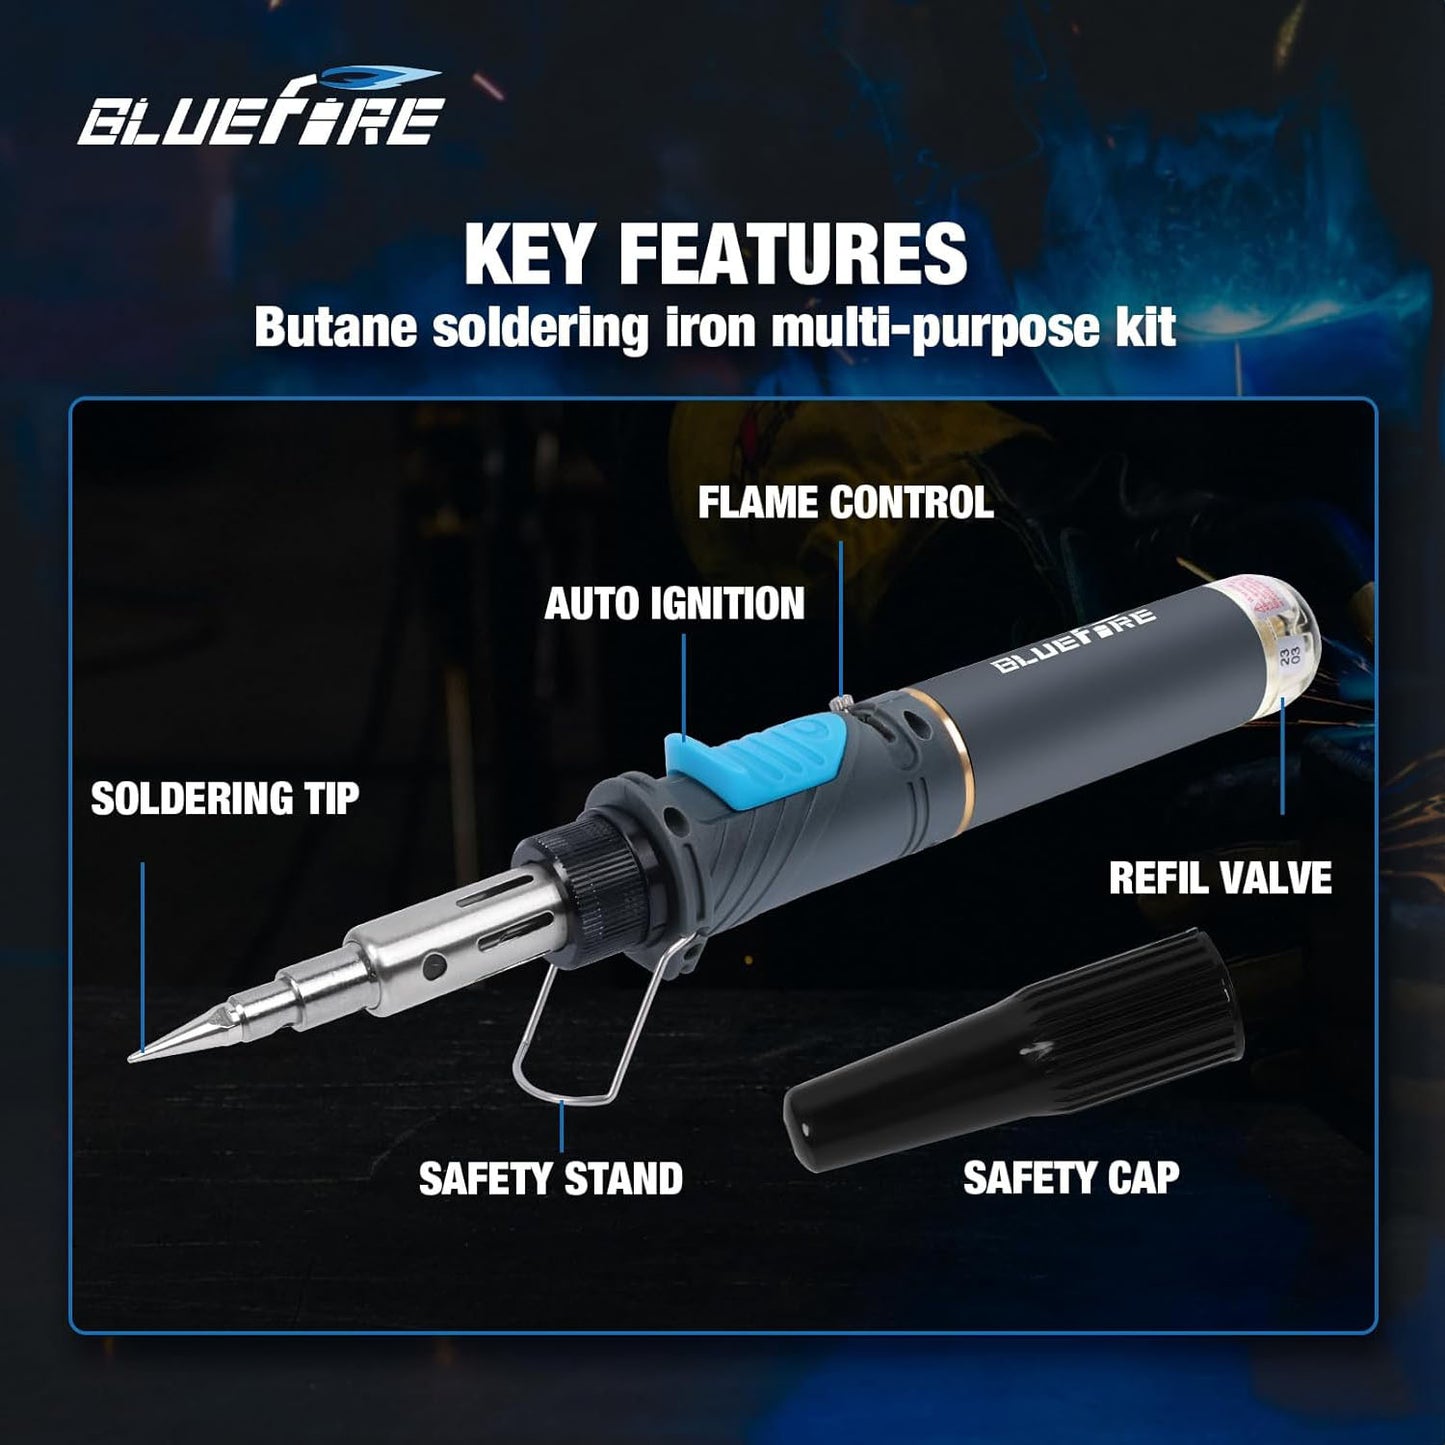 BLUEFIRE MRT-1117K Cordless Butane Soldering Iron Kit Portable Multi-Purpose Mini Torch for Electronics, Jewelry, Welding & Brazing|Self-Igniting,Flame Control,Light Weight,Rapid Heat Up,Rechargeable